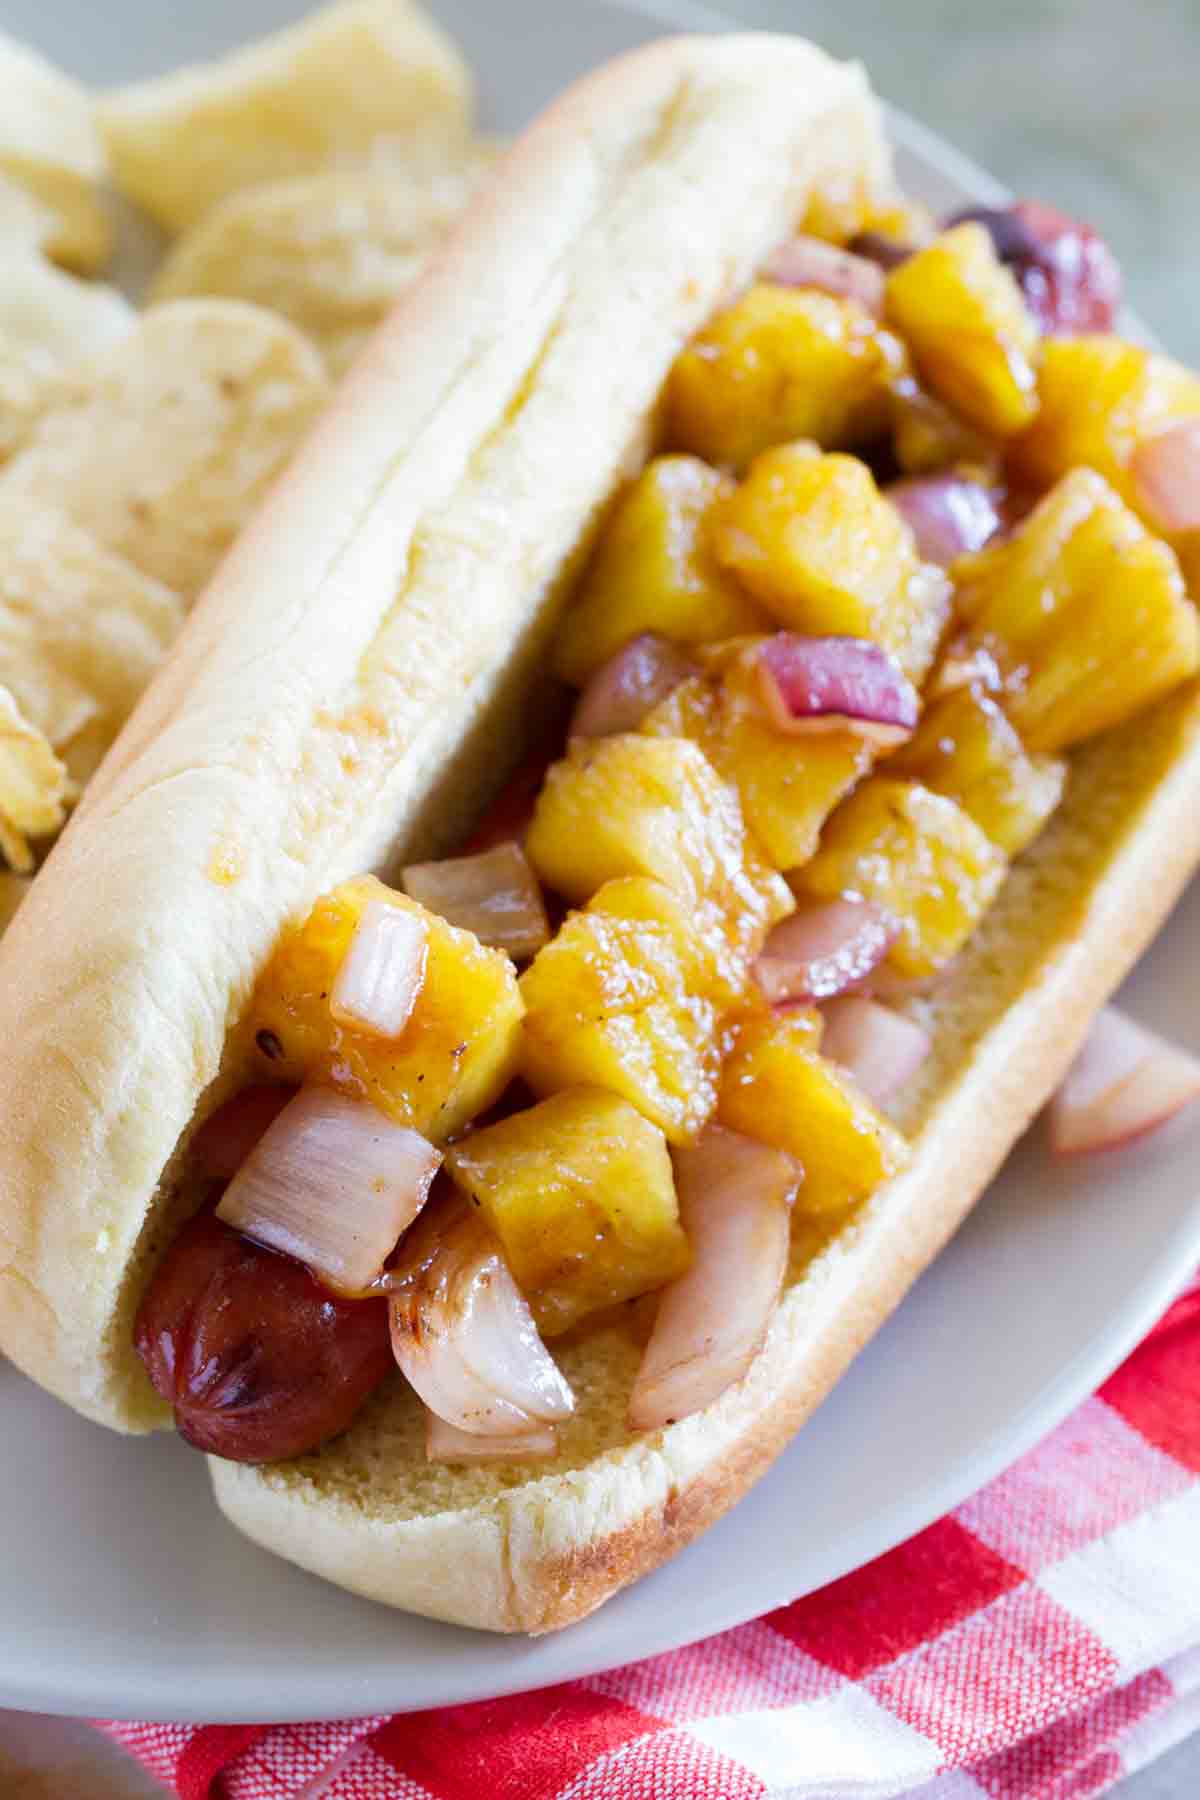 Hot dog topped with grilled pineapple, onion, and barbecue sauce